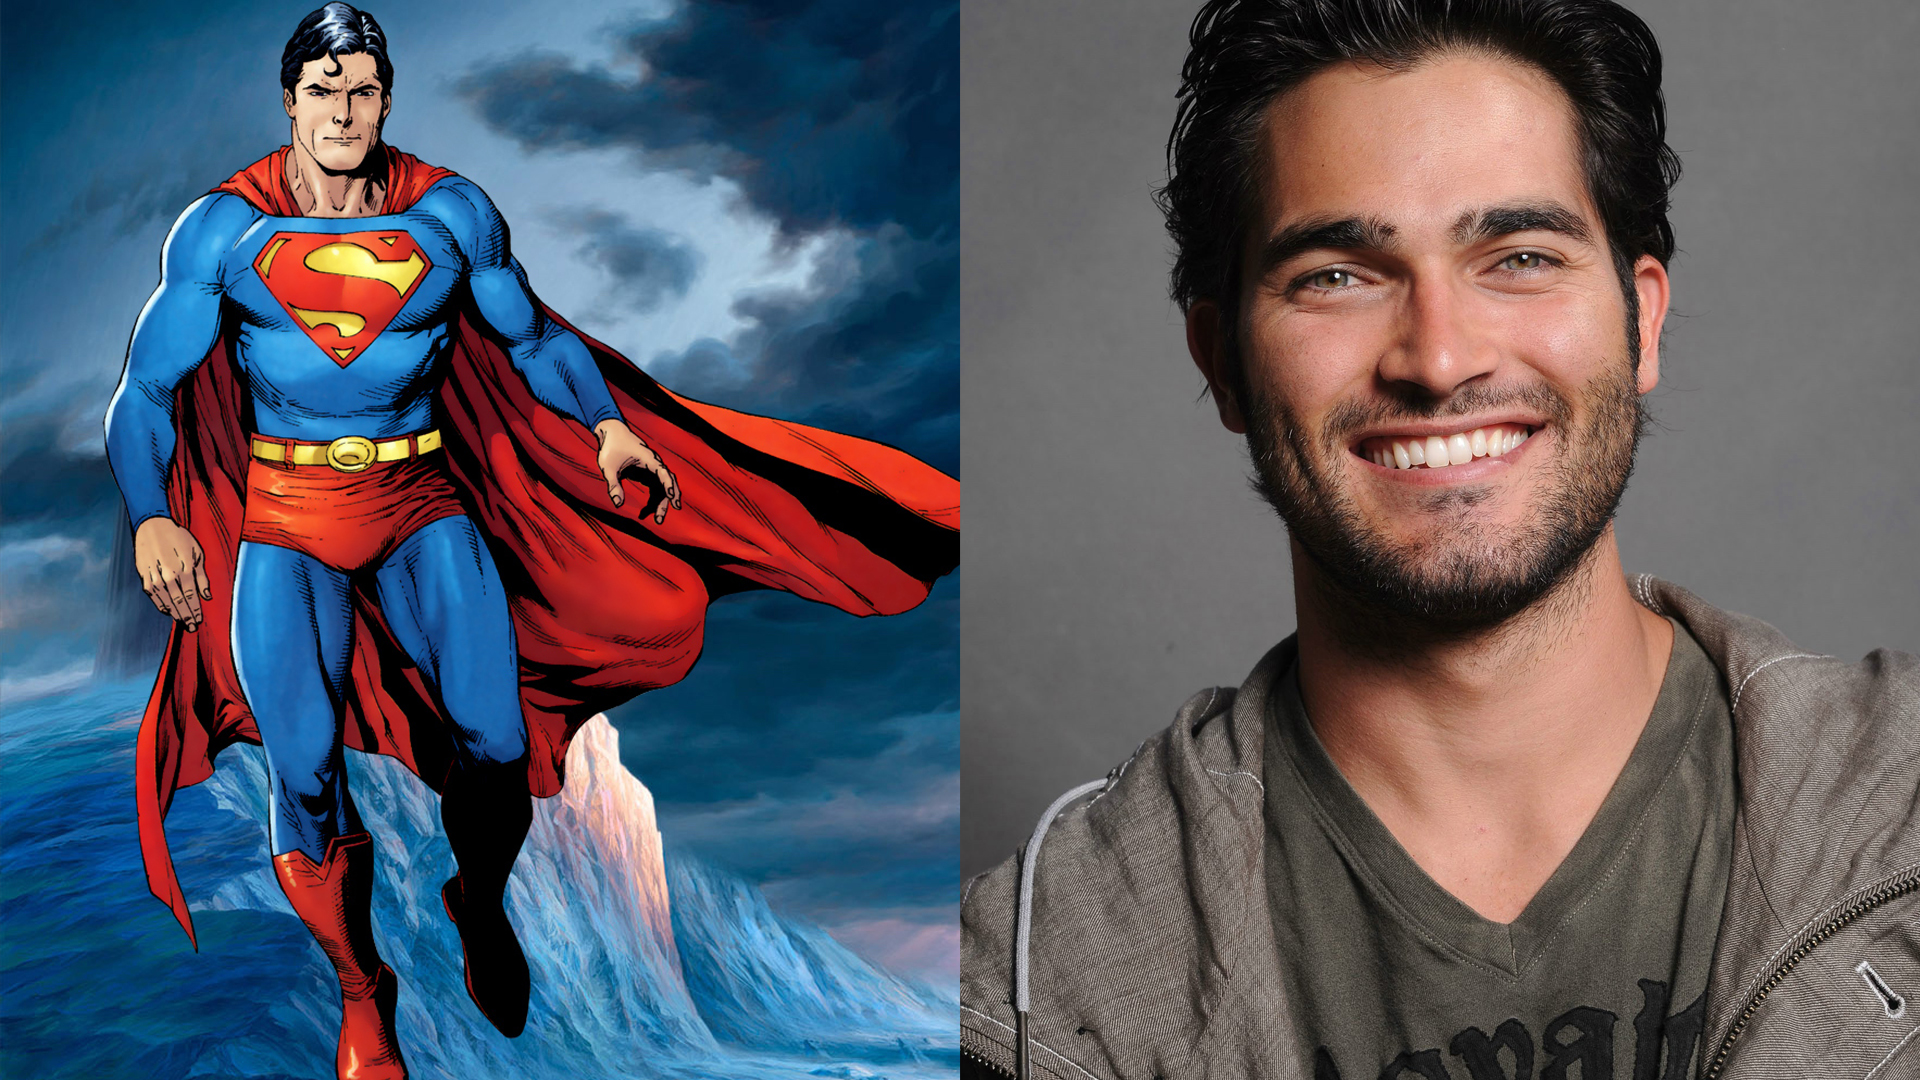 Supergirl Finds Its Superman In Everybody Wants Some And Teen Wolf Star Tyler Hoechlin